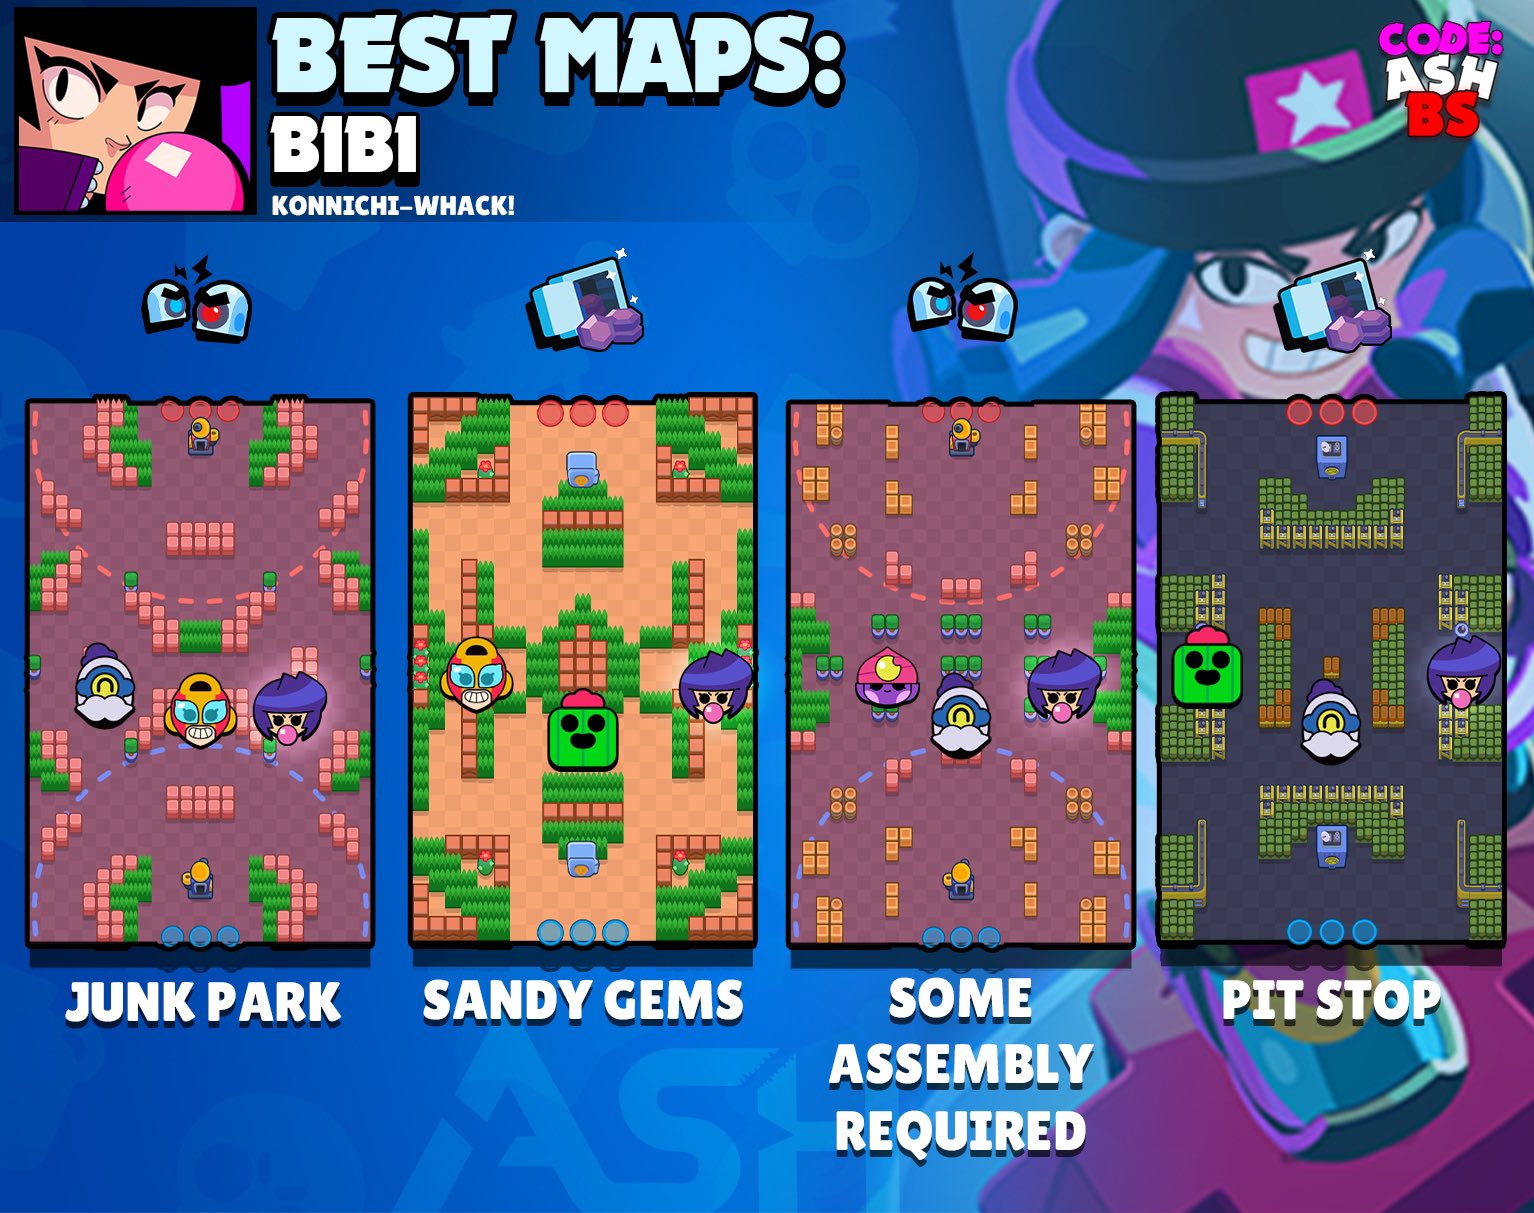 Code Ashbs On Twitter Bibi Tier List For Every Game Mode And Best Maps To Use Her In With Suggested Comps Which Brawler Should I Do Next Bibi Brawlstars Https T Co Wcghn8jm9f - bibi brawl stars charaktere